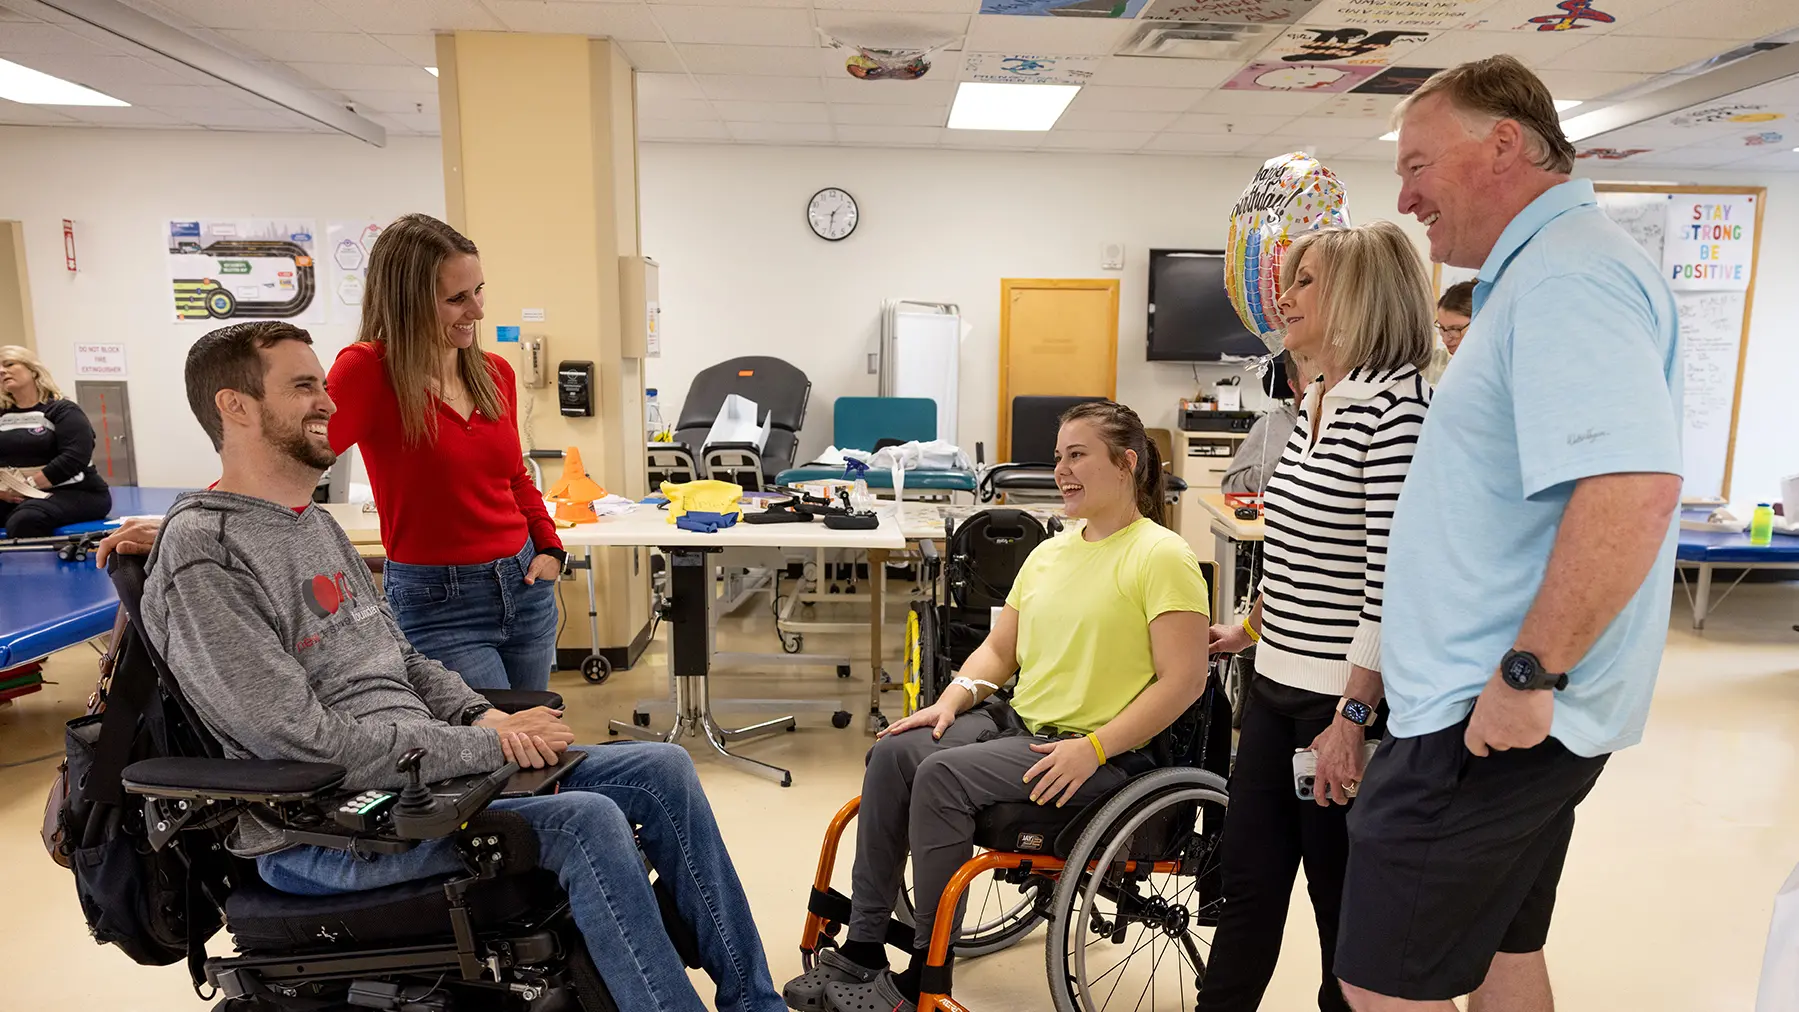 Megan Gentry rests her hand on the back of her husband’s wheelchair as the couple talks with a young woman in a wheelchair, whose parents stand behind her as they all chat. They're in a room with hospital workers and other patients in the background. The three smile and make eye contact as they chat.